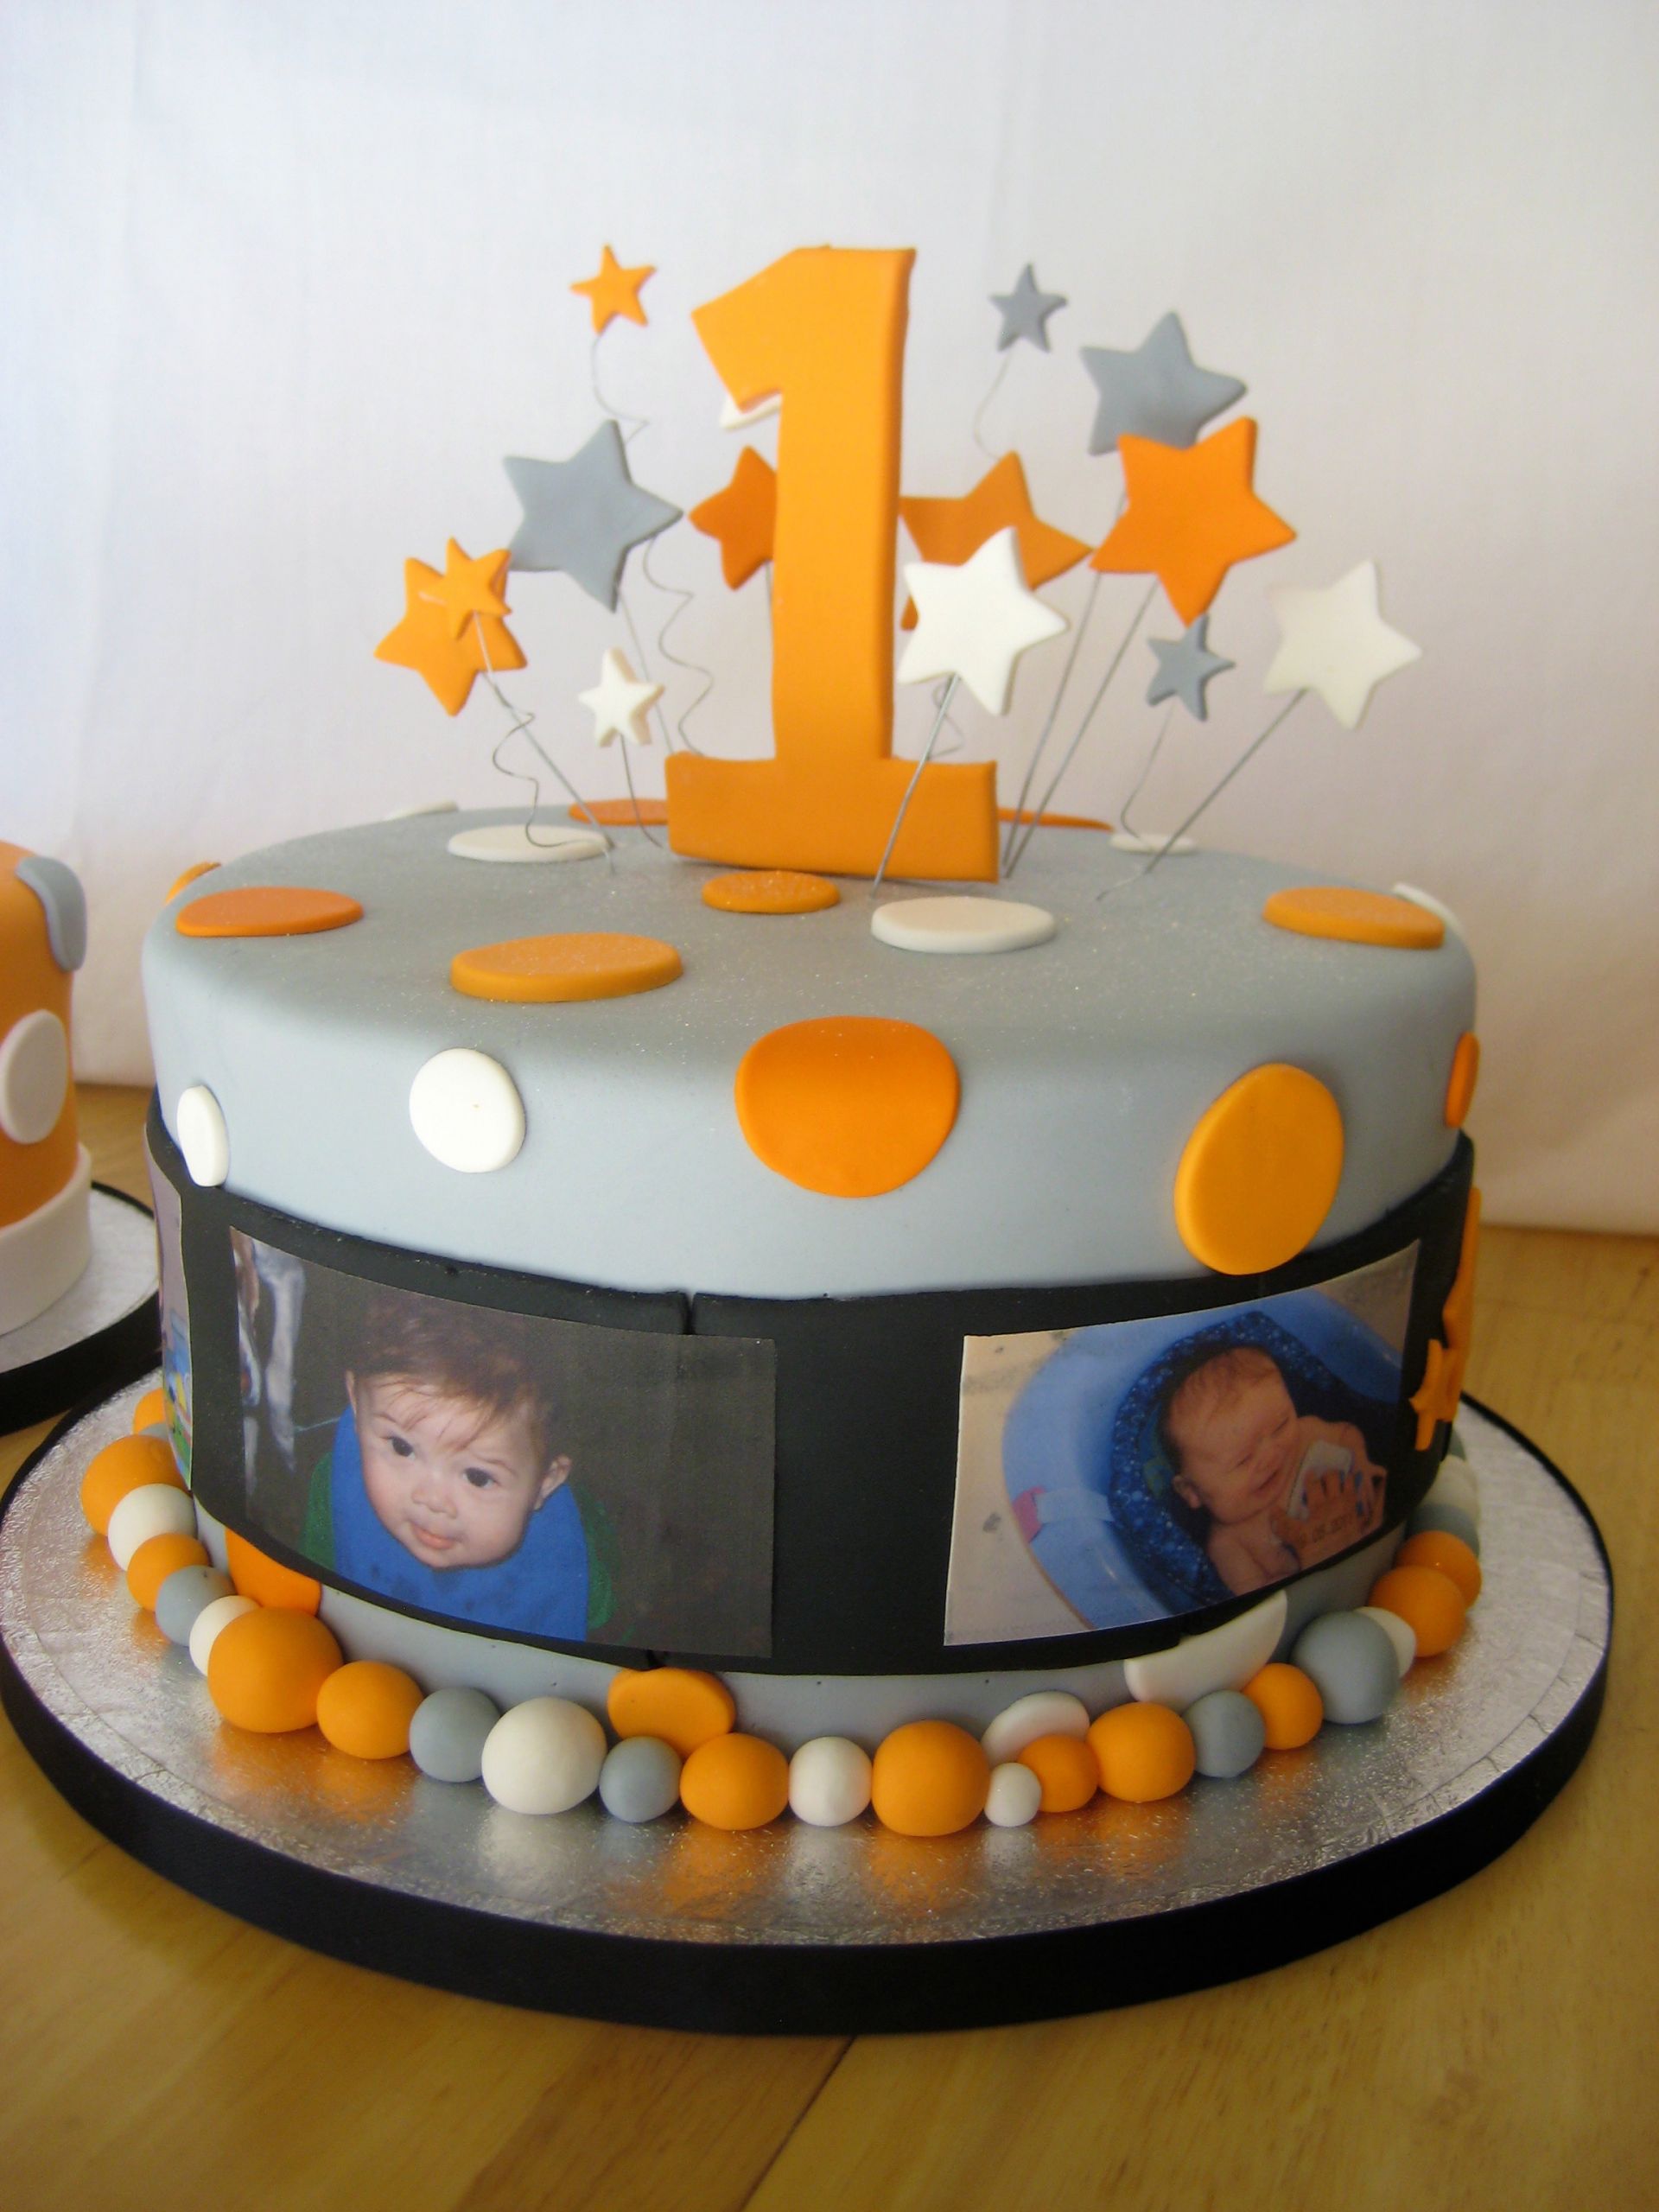 Birthday Cake For 1 Year Old
 e Year Old in a FLASH cake – Stars Edible and